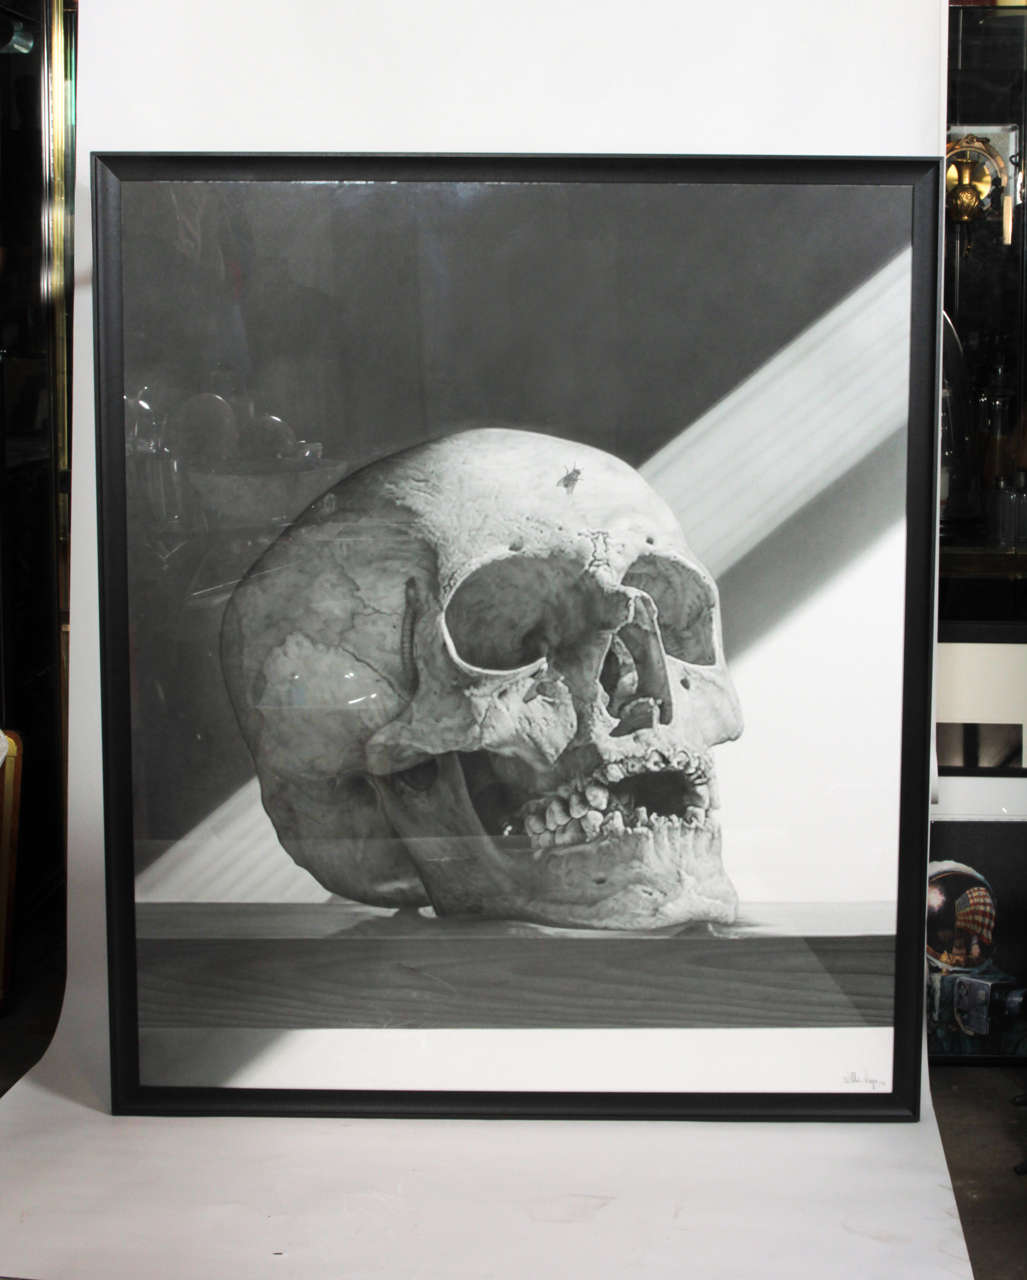 This contemporary pencil drawing by Willis Vega is anatomically perfect. Mr Vega lives in Columbia and is one of the greatest living artist working in this medium. The details of the skull sitting on a wood shelf is so fine  that it appears at first